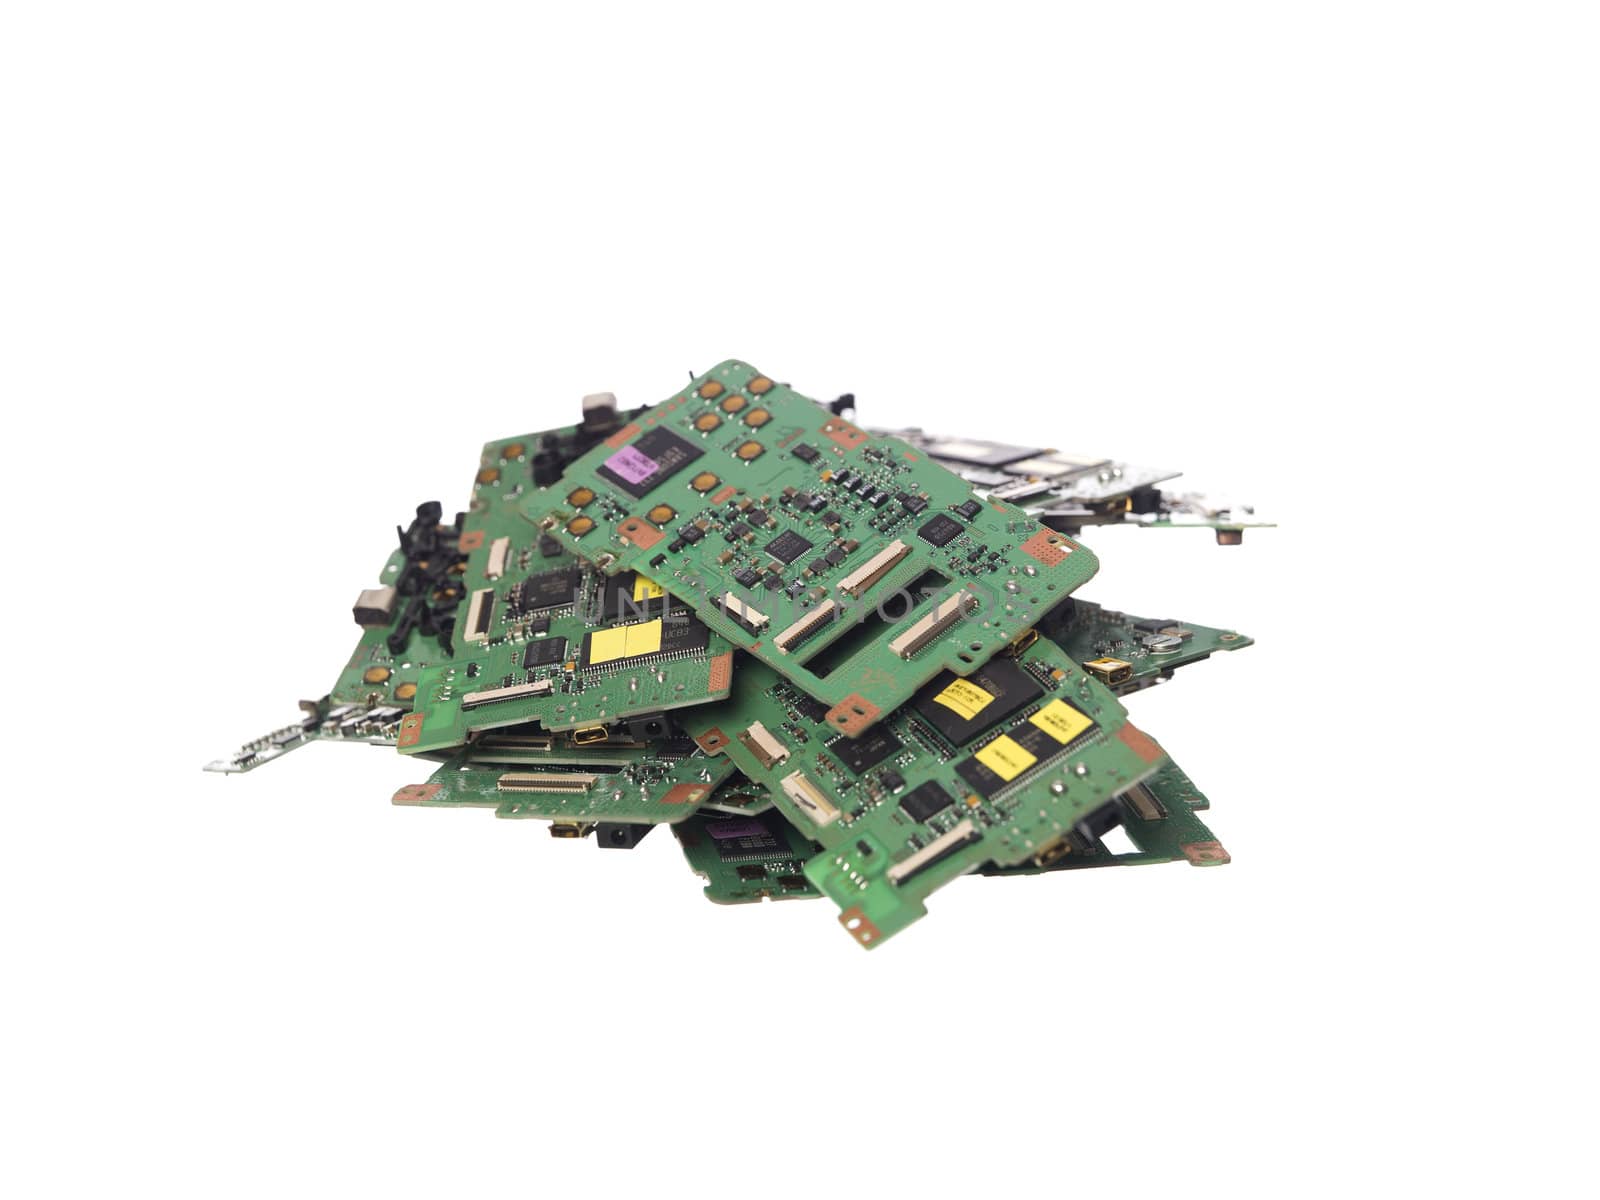 Stack of circuit cards by gemenacom